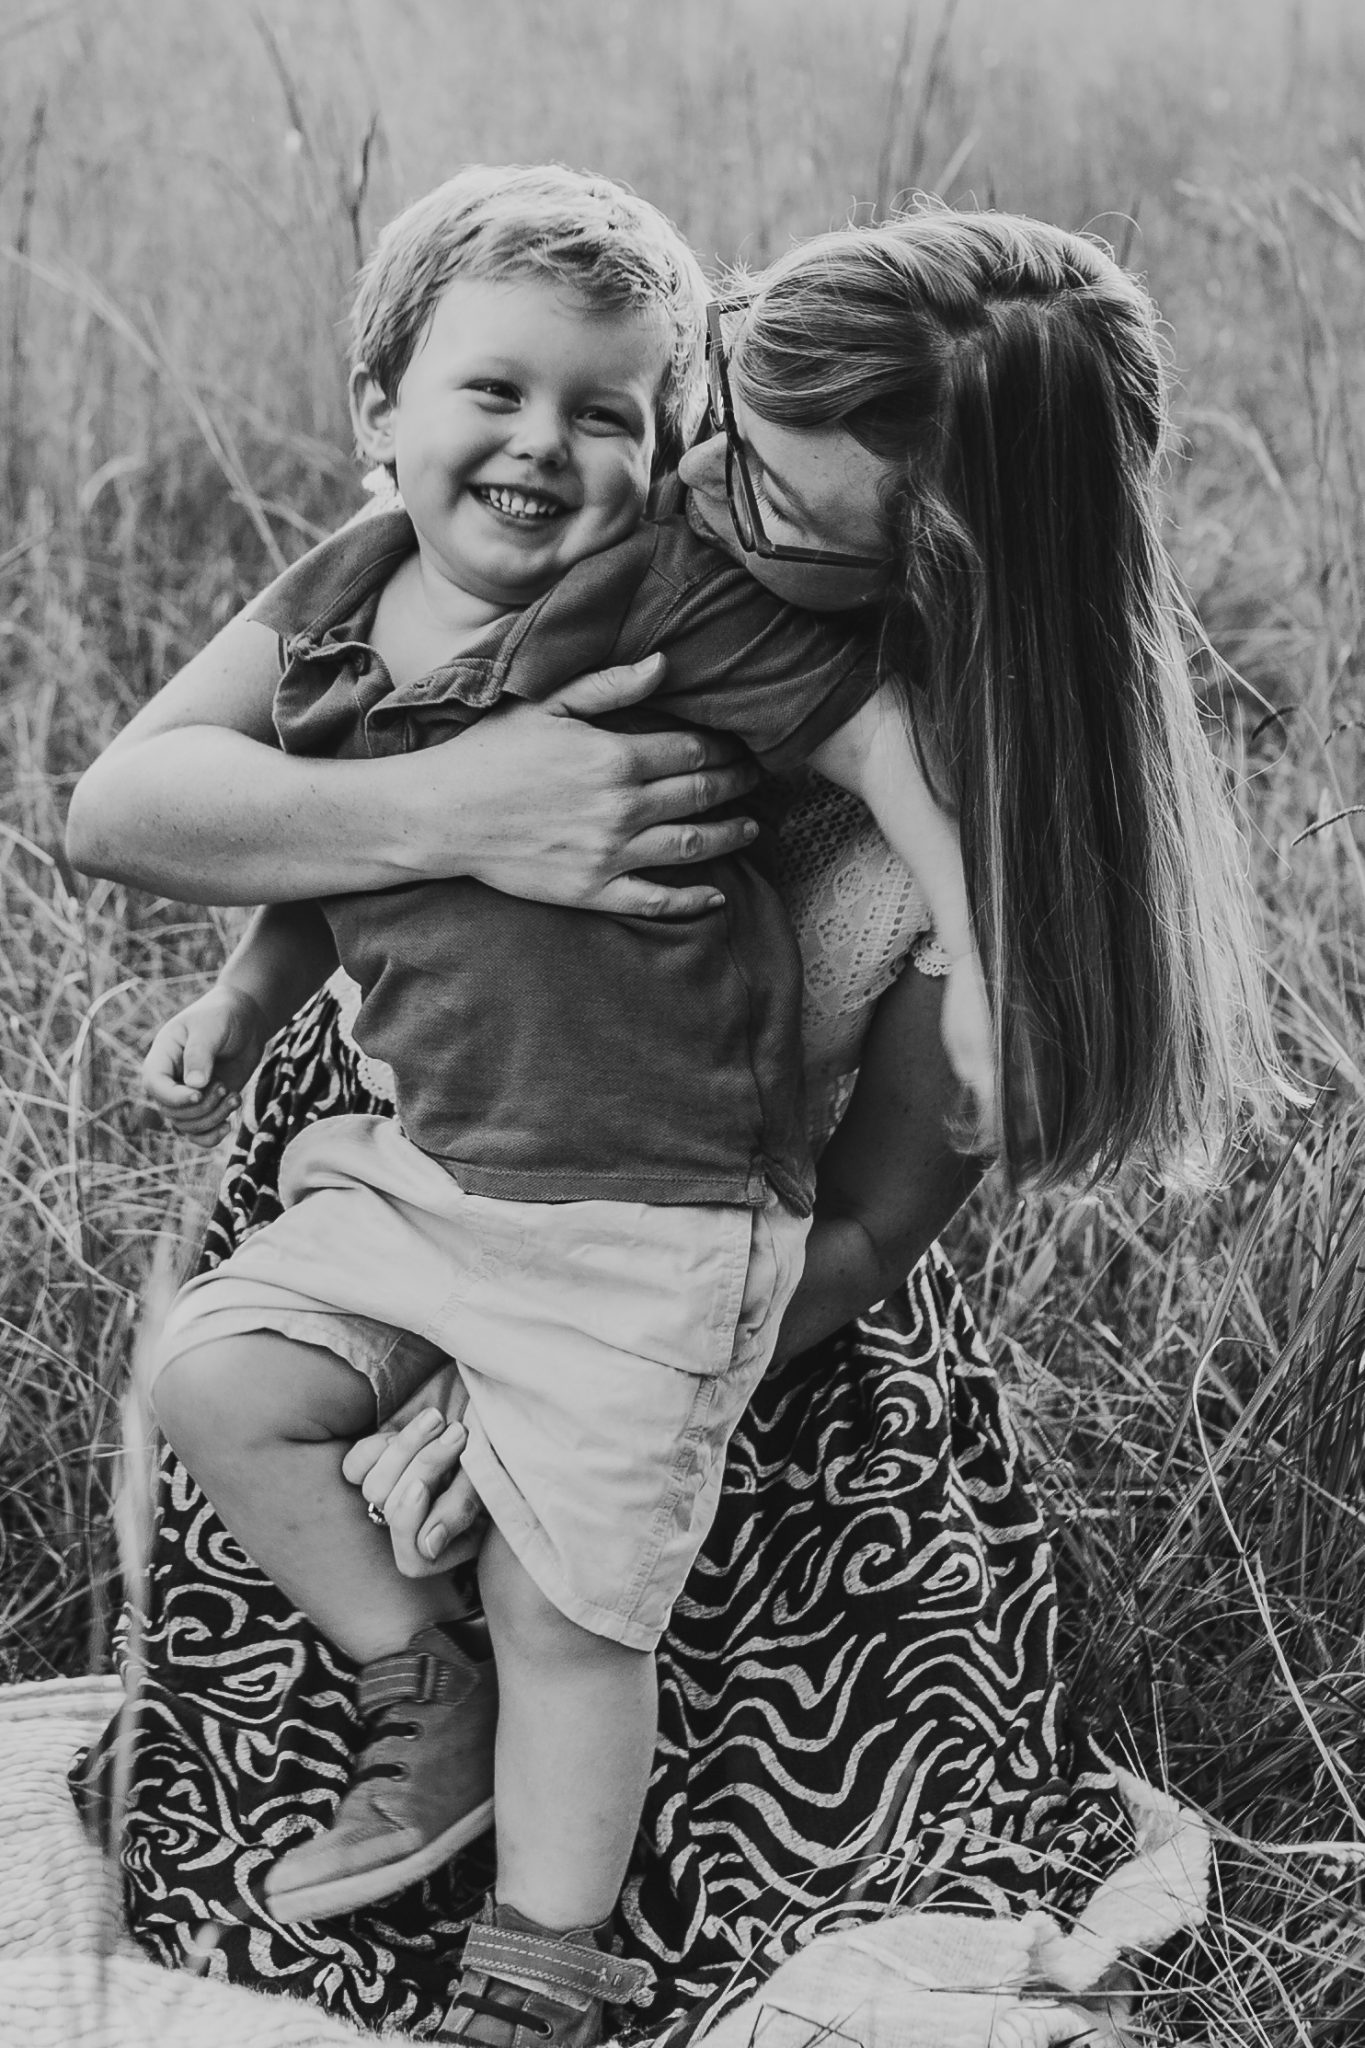 Black and white image of boy smiling as his mother hugs and kisses him